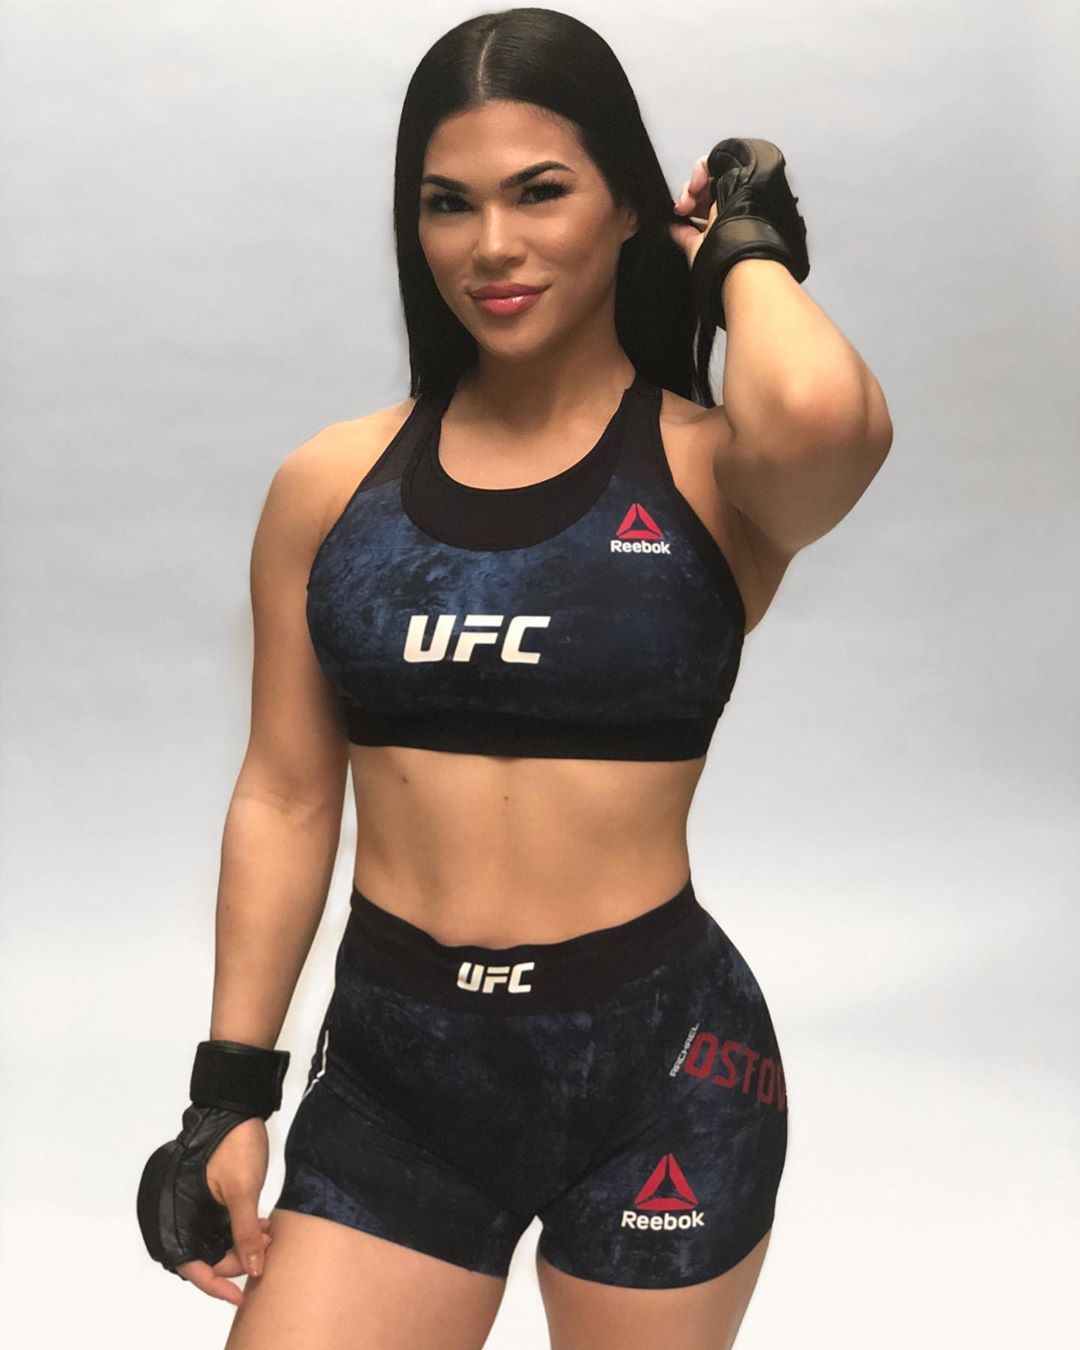 Only Fans Rachael Ostovich Telegraph